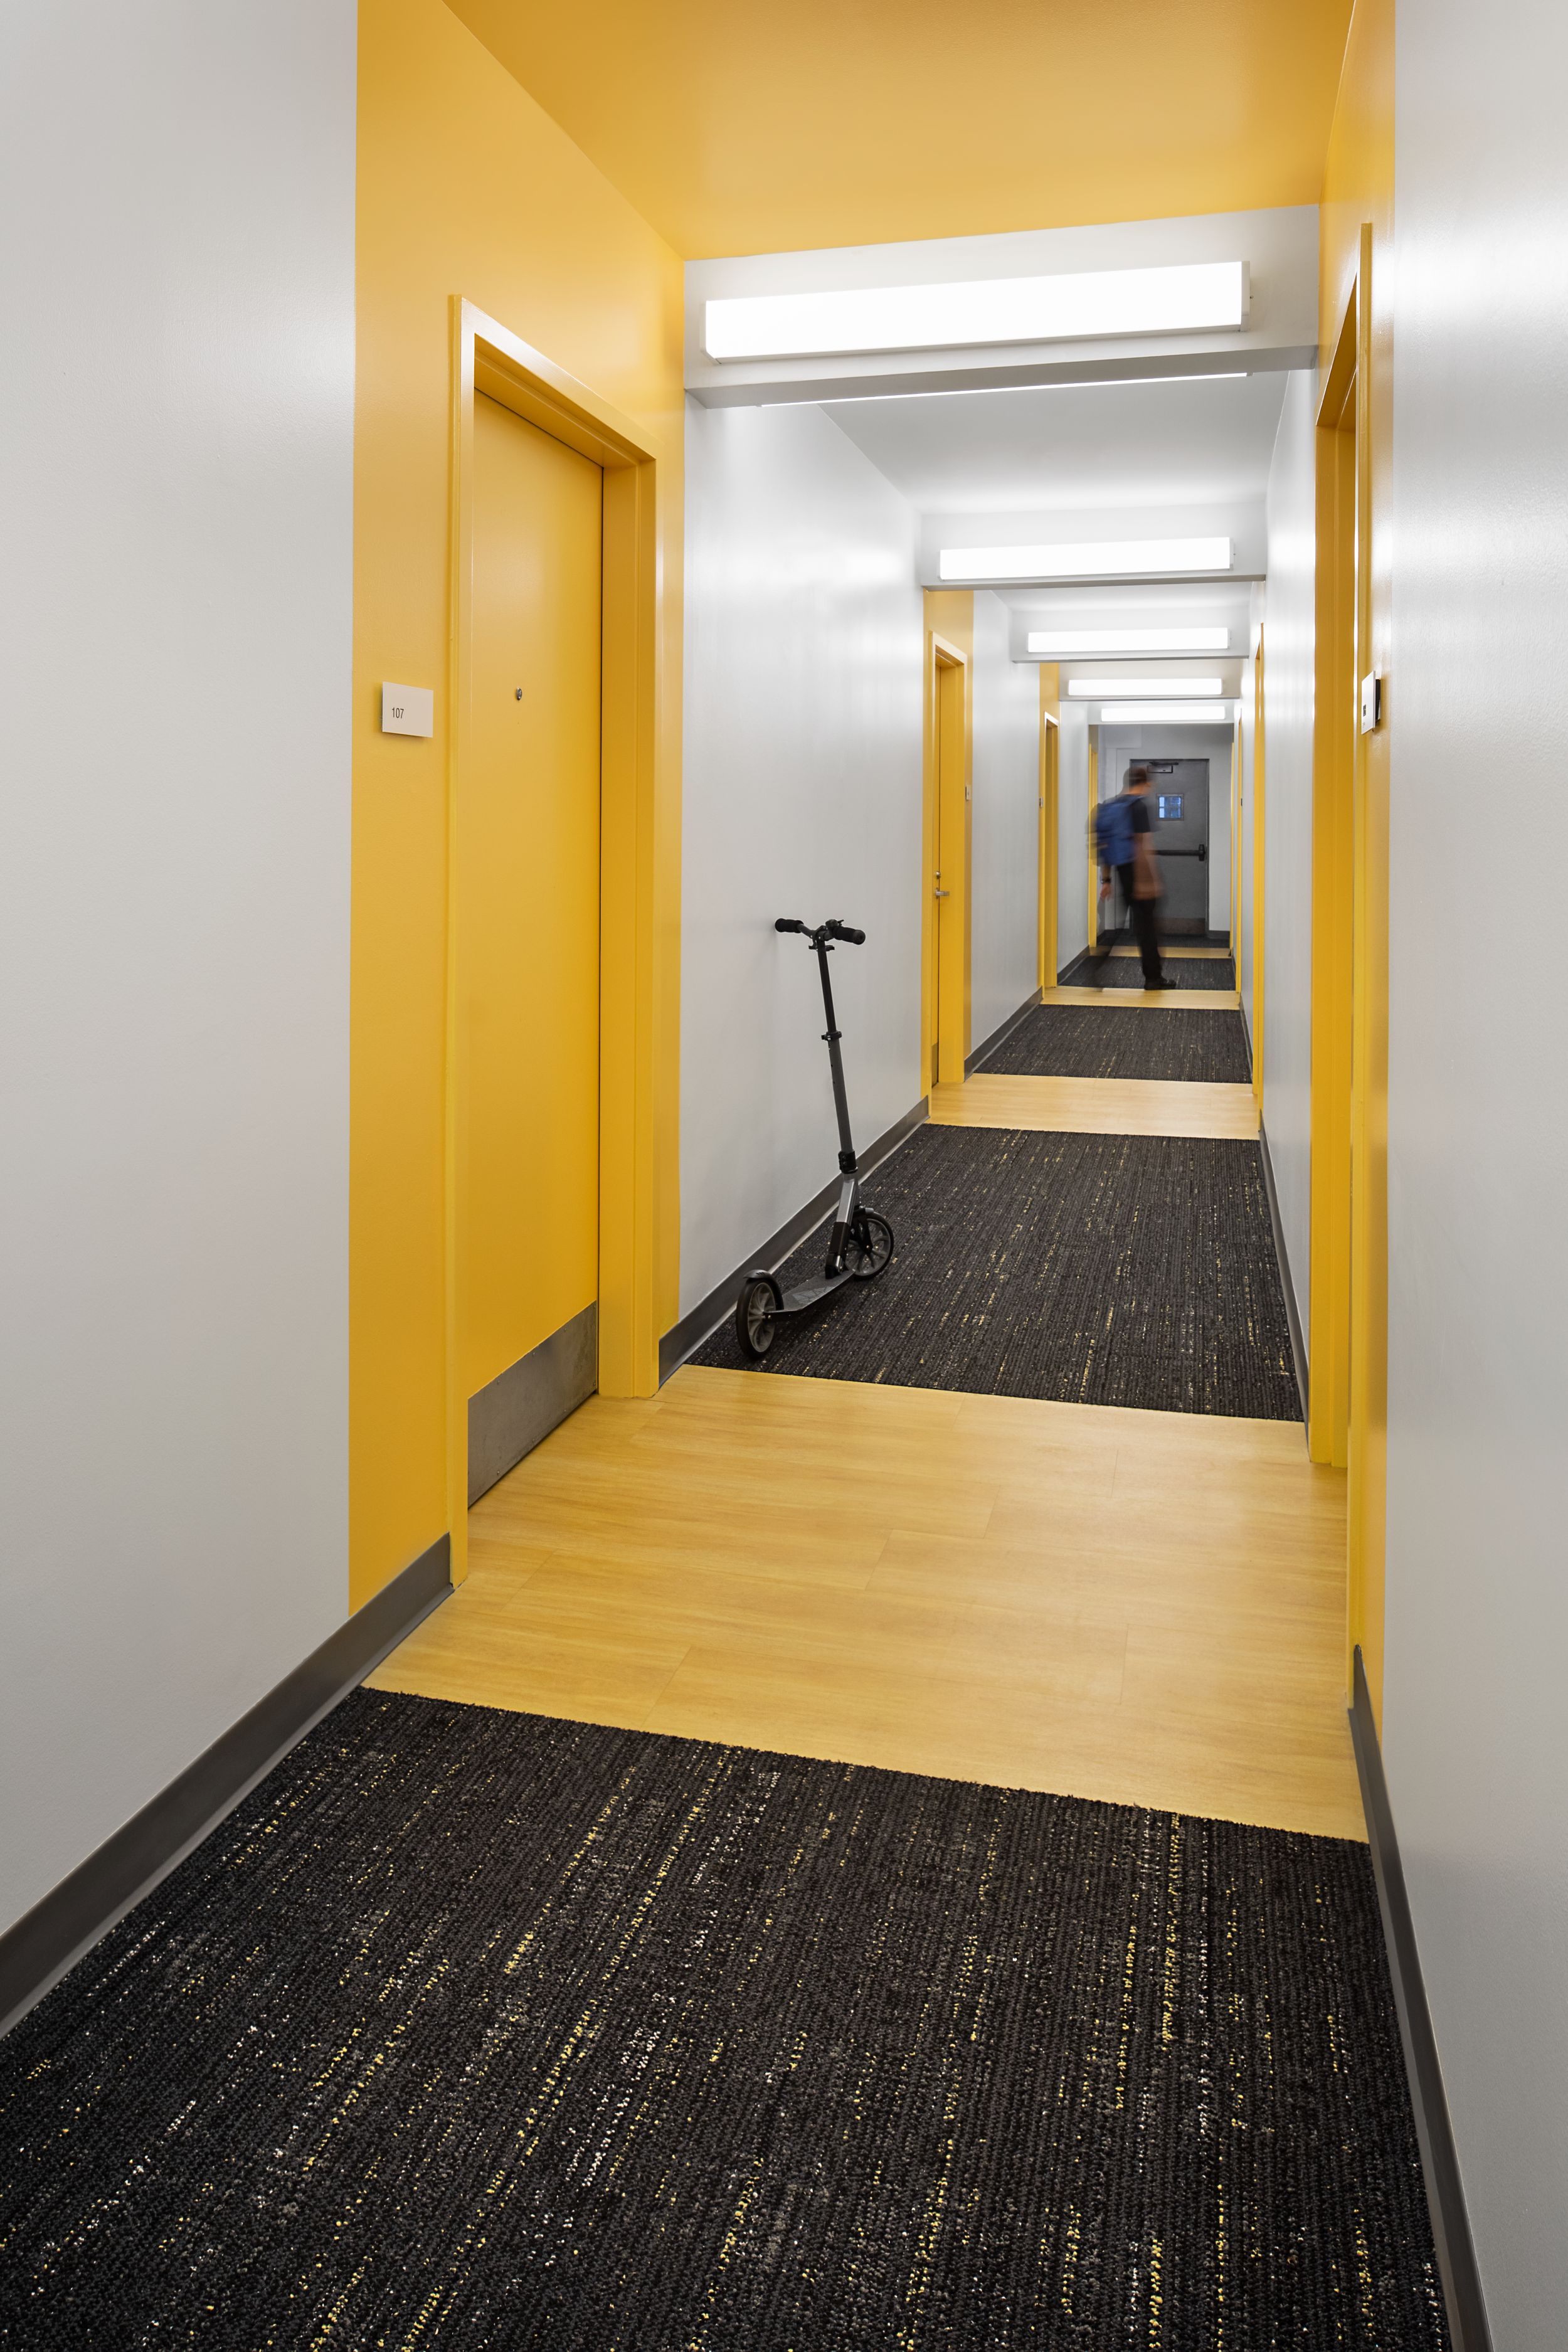 Interface Bitrate plank carpet tile and LVT in residence hall corridor imagen número 2